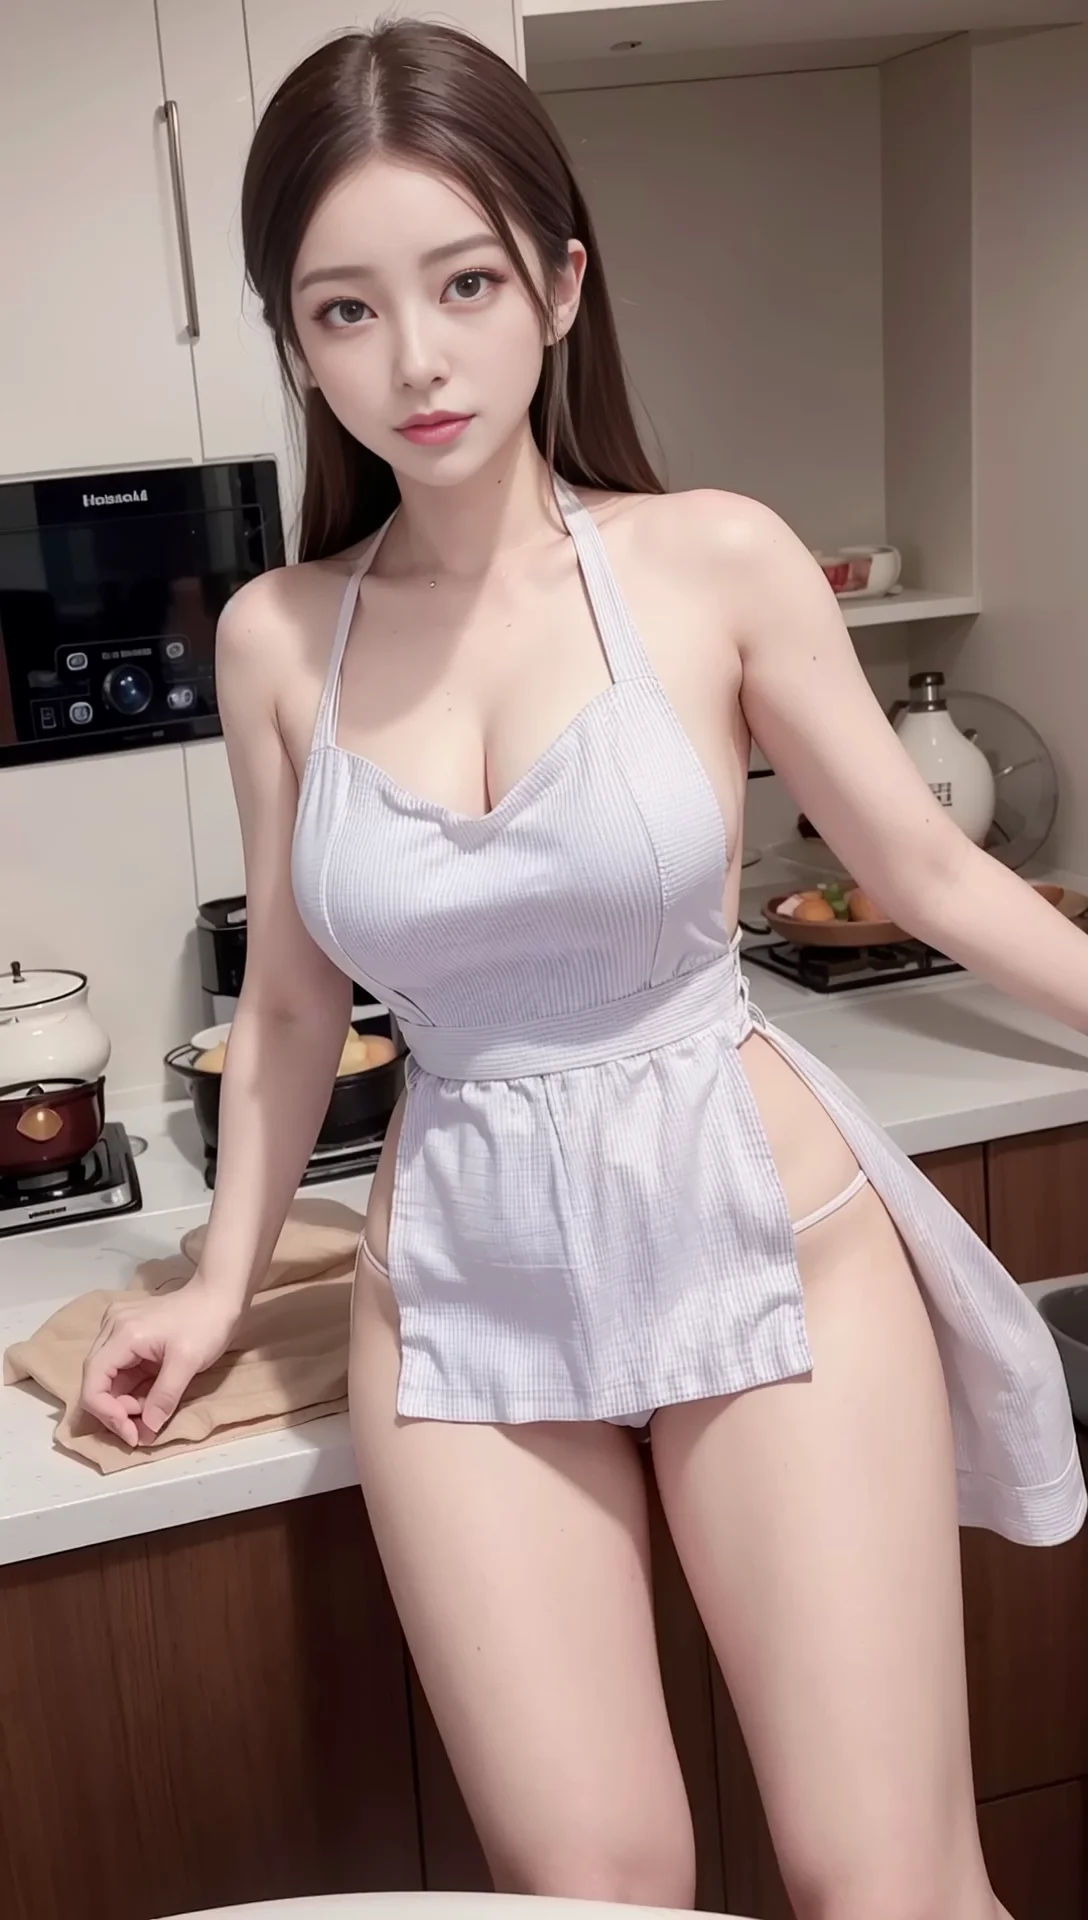 Attractive Woman Sexy Apron Images 06